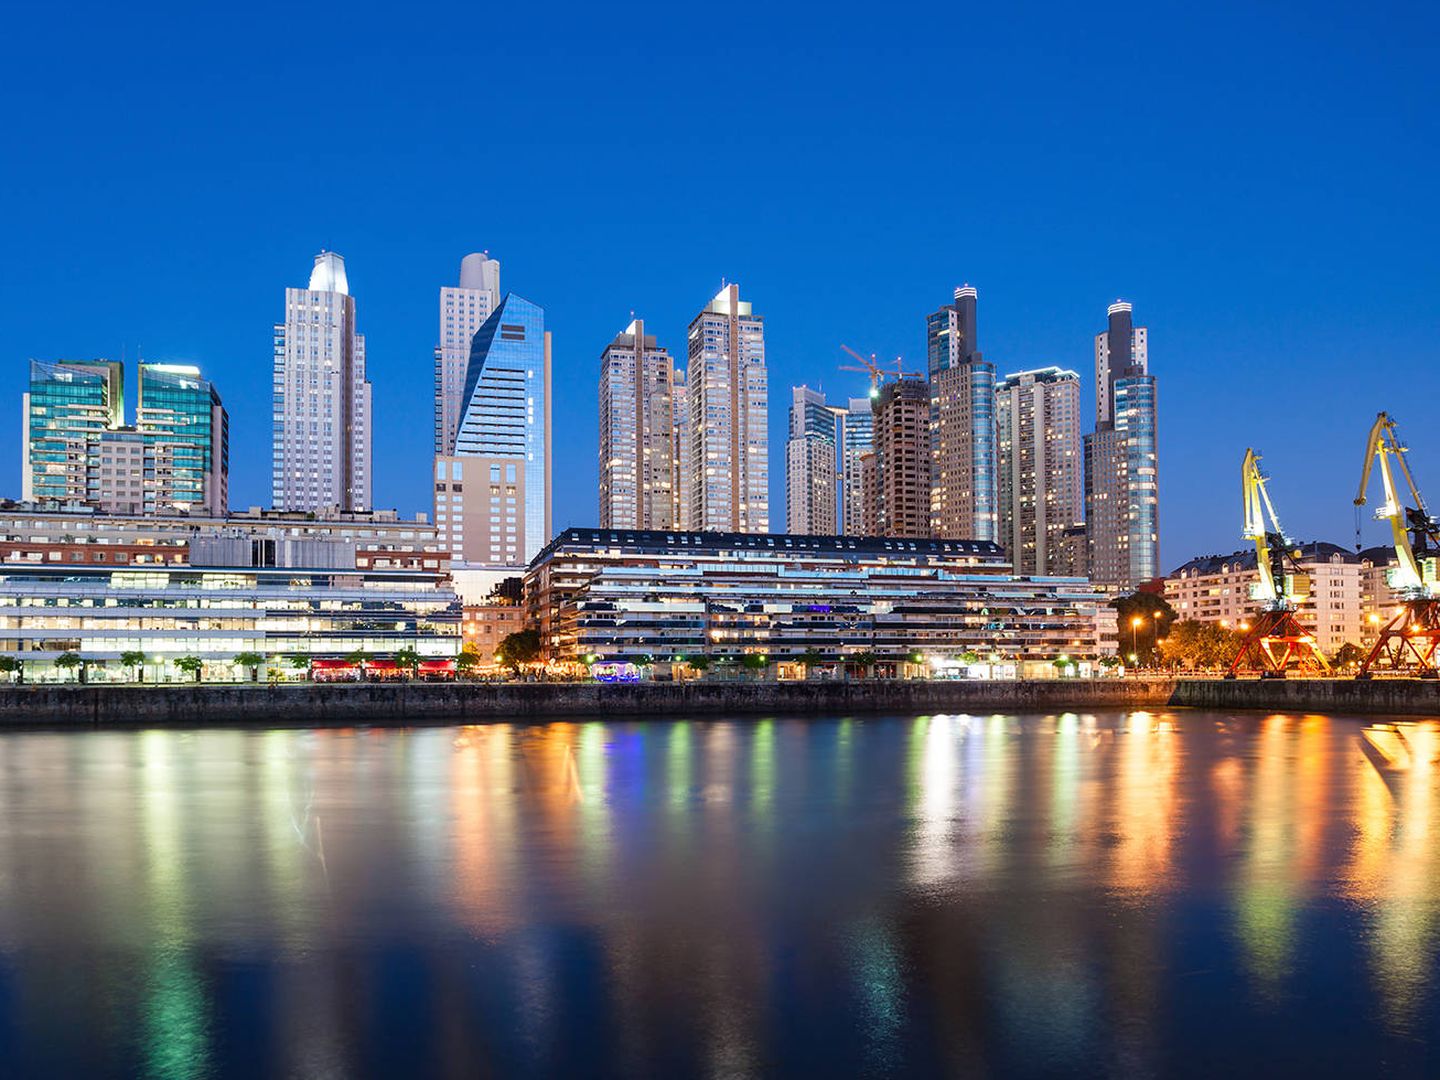 Buenos Aires. (Shutterstock)